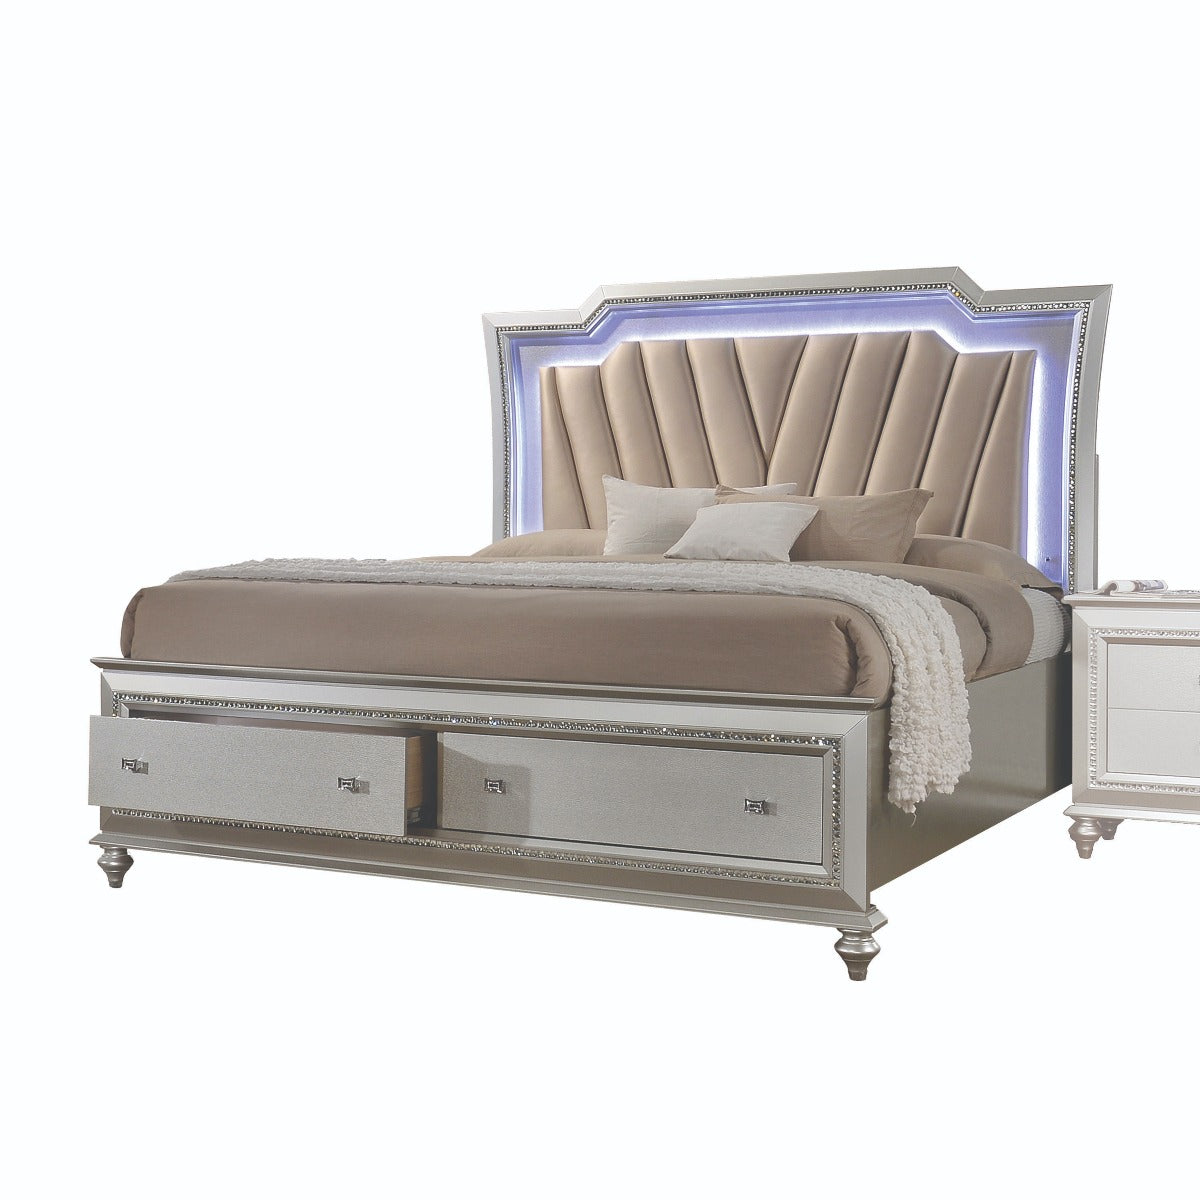 ACME Furniture Beds - California King Bed, PU & Champagne